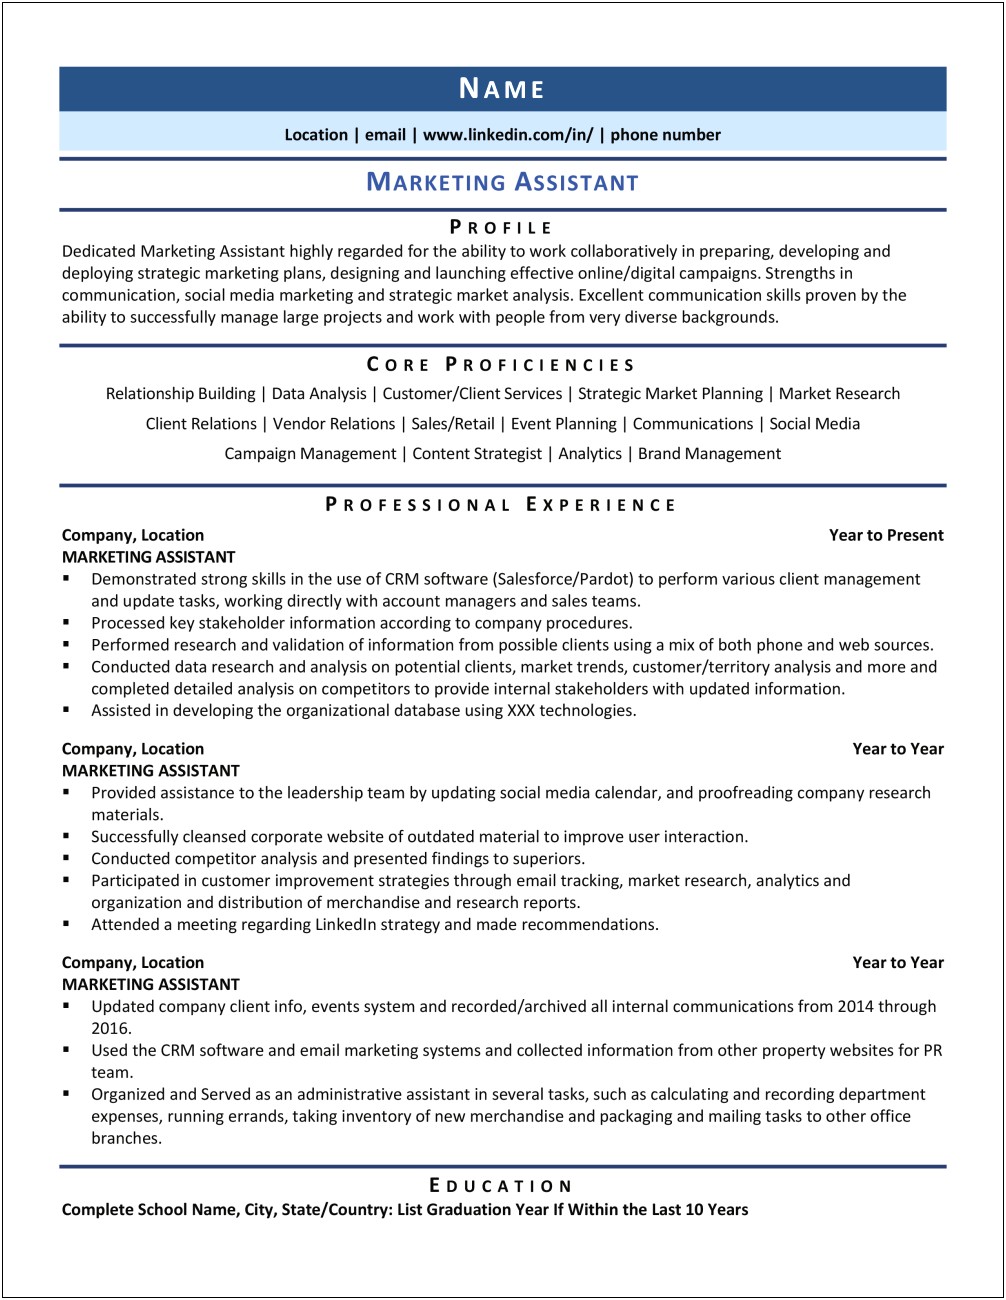 Coty Marketing Assistant Manager Resume